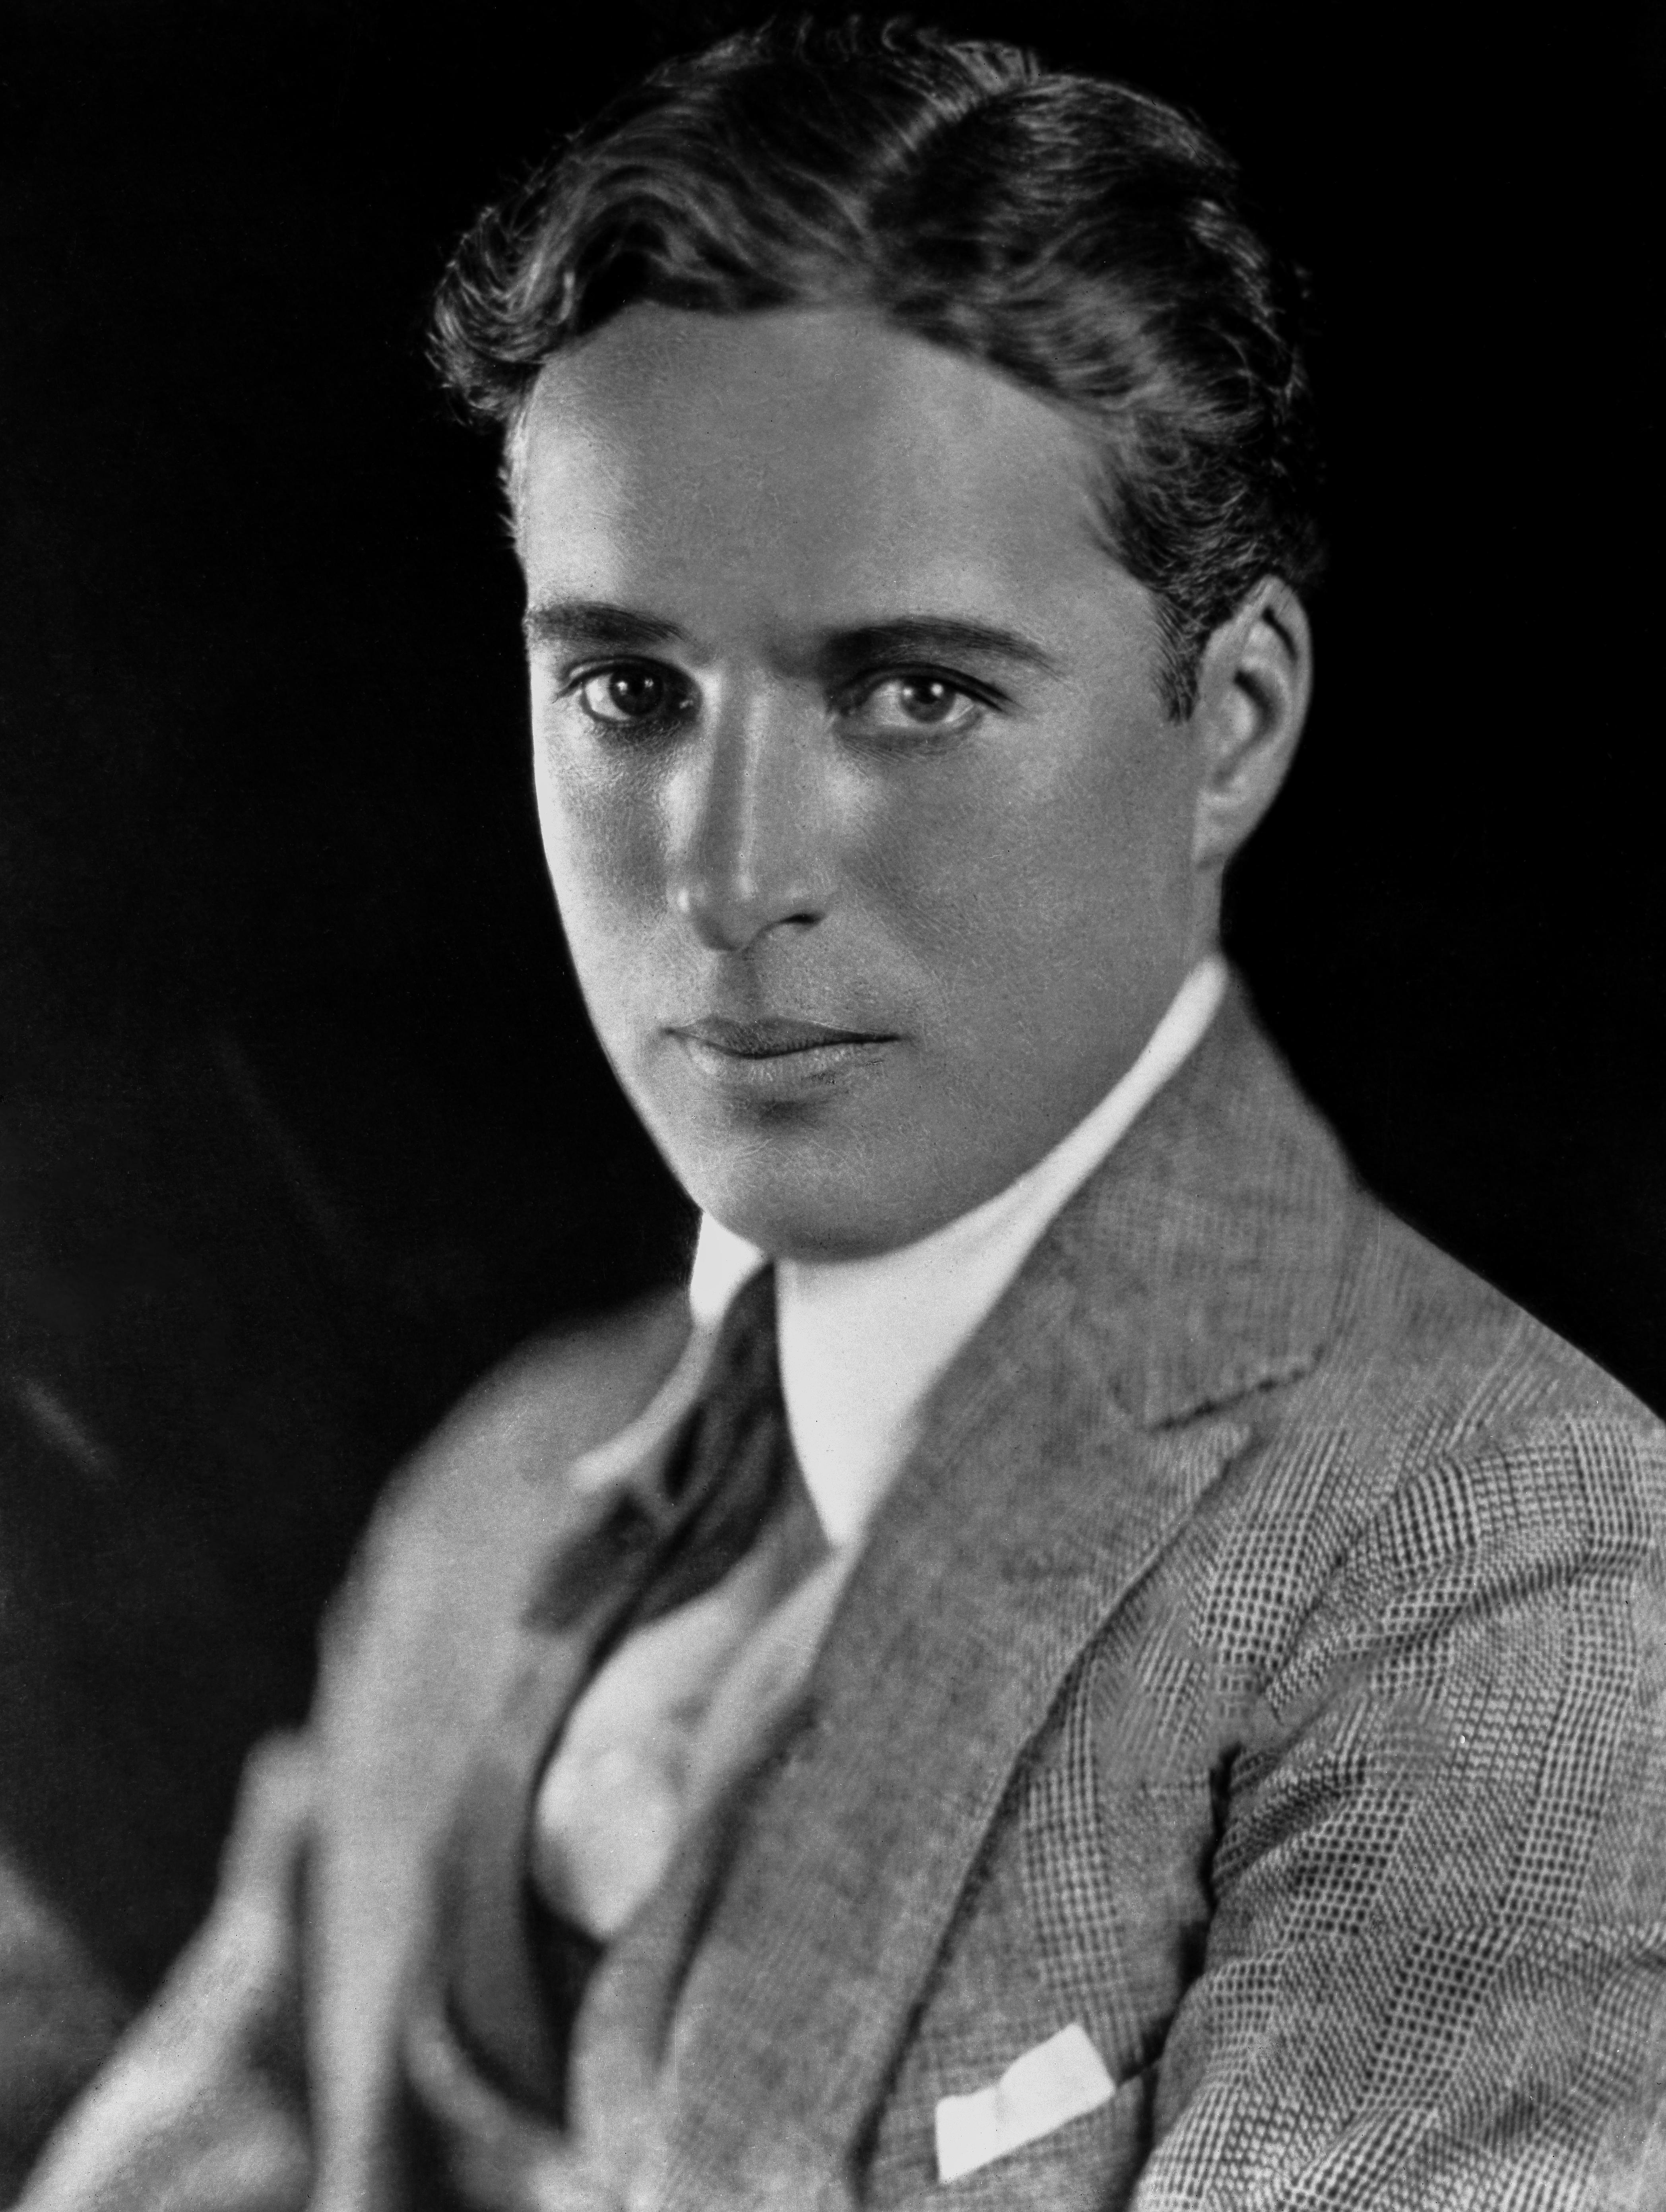 Unknown Black and White Photograph - Charlie Chaplin Young and Handsome Star Movie Star News Fine Art Print